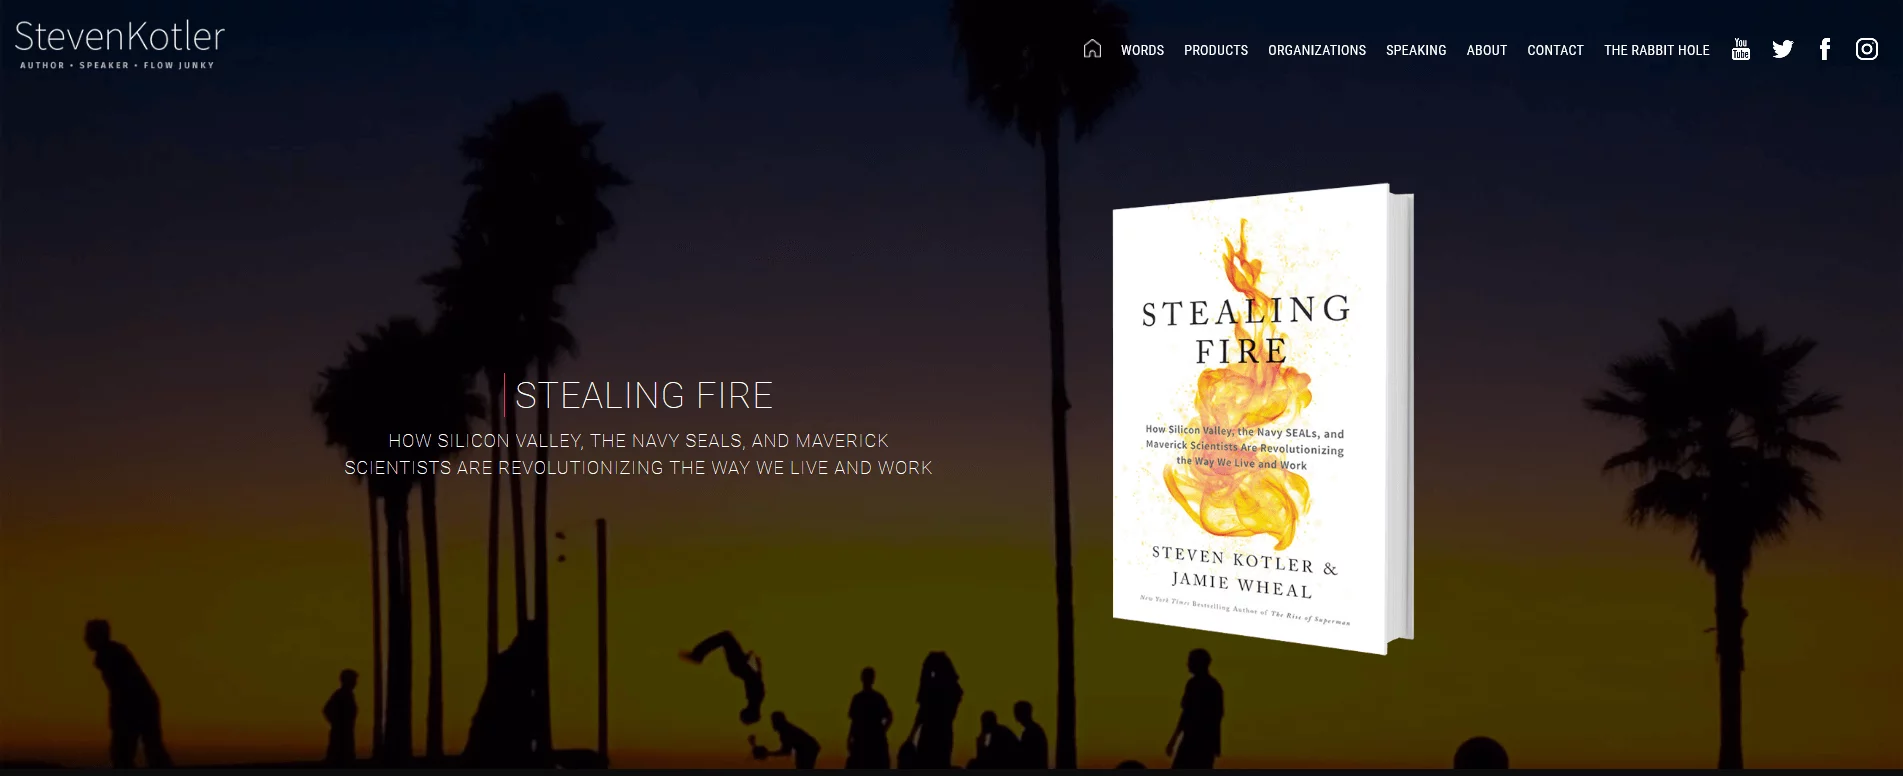 Buying Stealing Fire Stealing Fire by Steven Kotler and Jamie Wheal